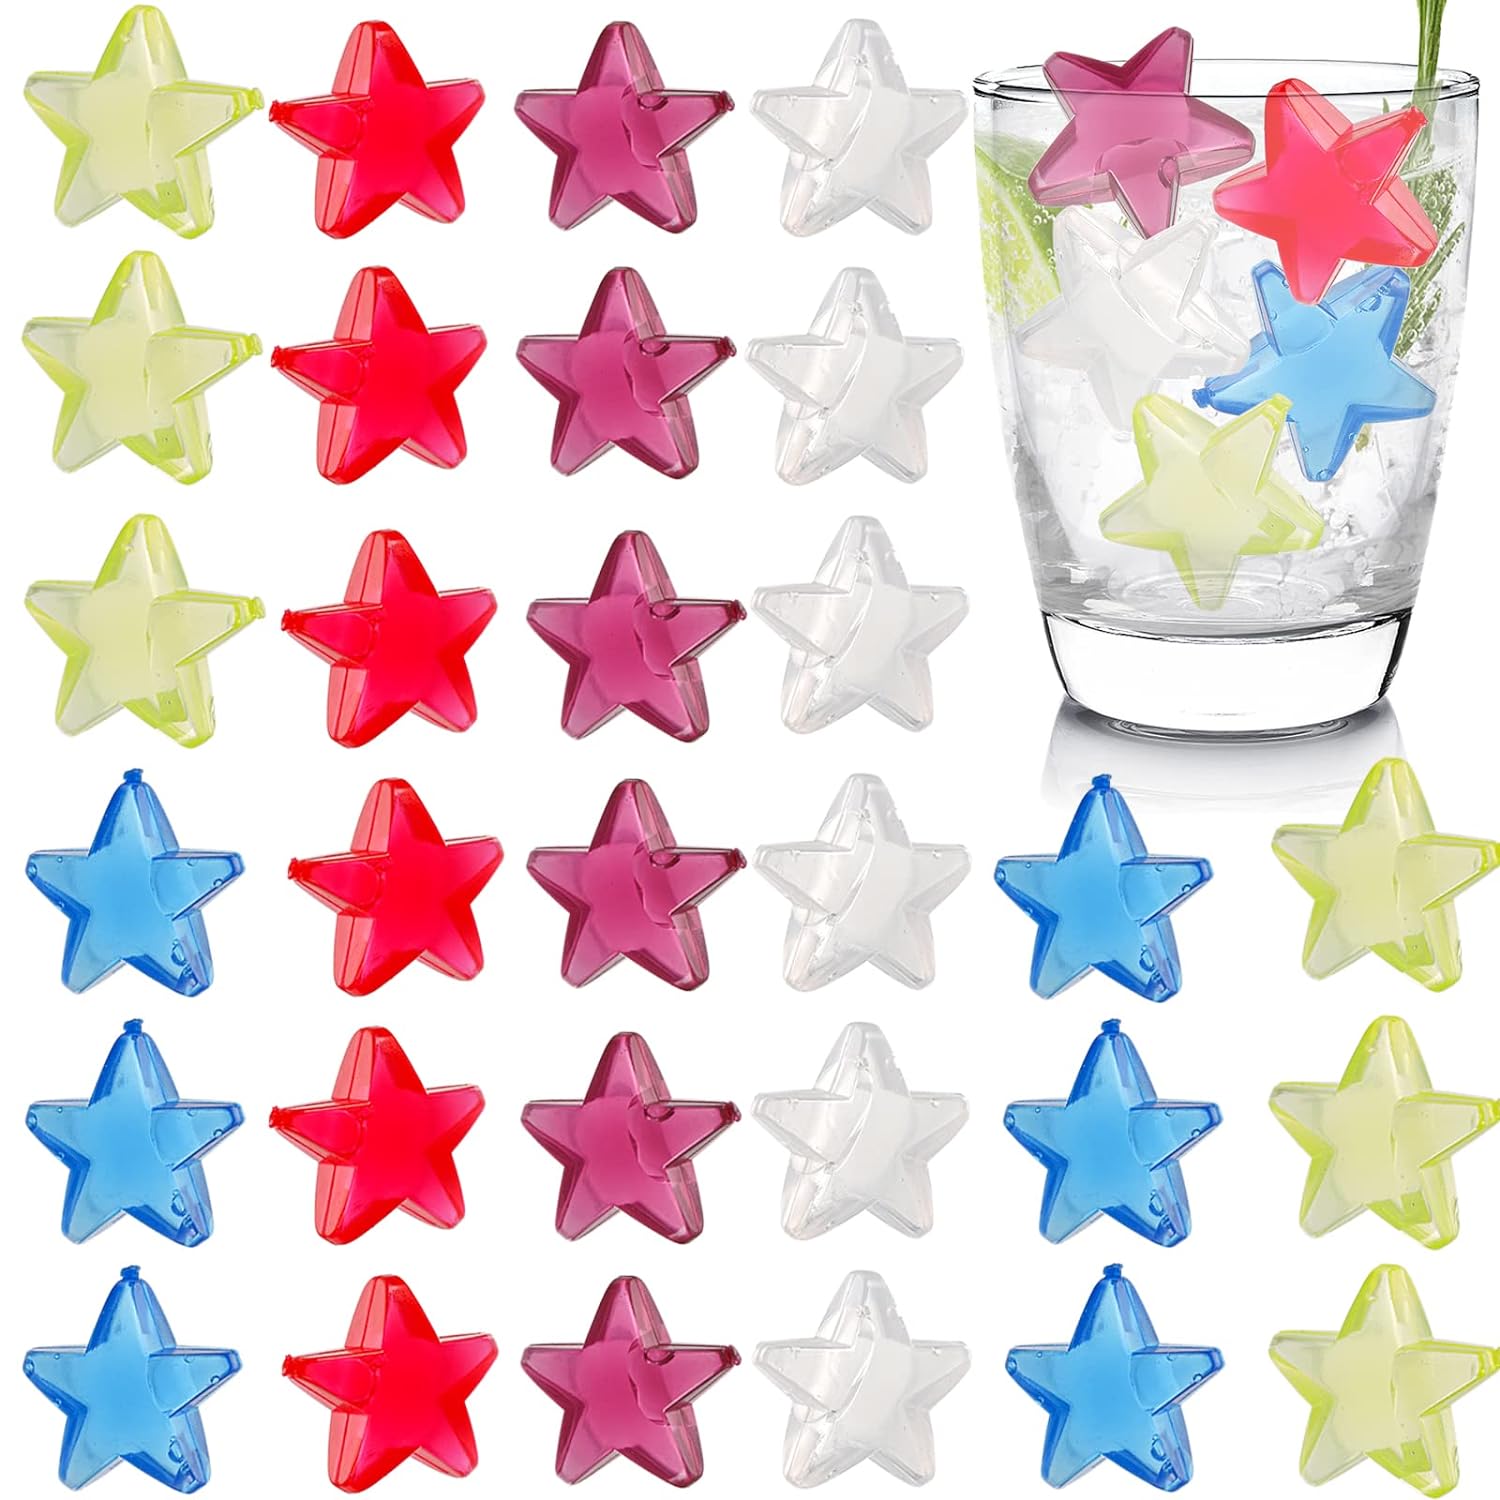 thinkstar 200 Pcs Reusable Ice Cubes, Plastic Ice Cubes For Drinks, Colorful Refreezable Non Diluting Ice Cubes For Cocktails, Whiske…